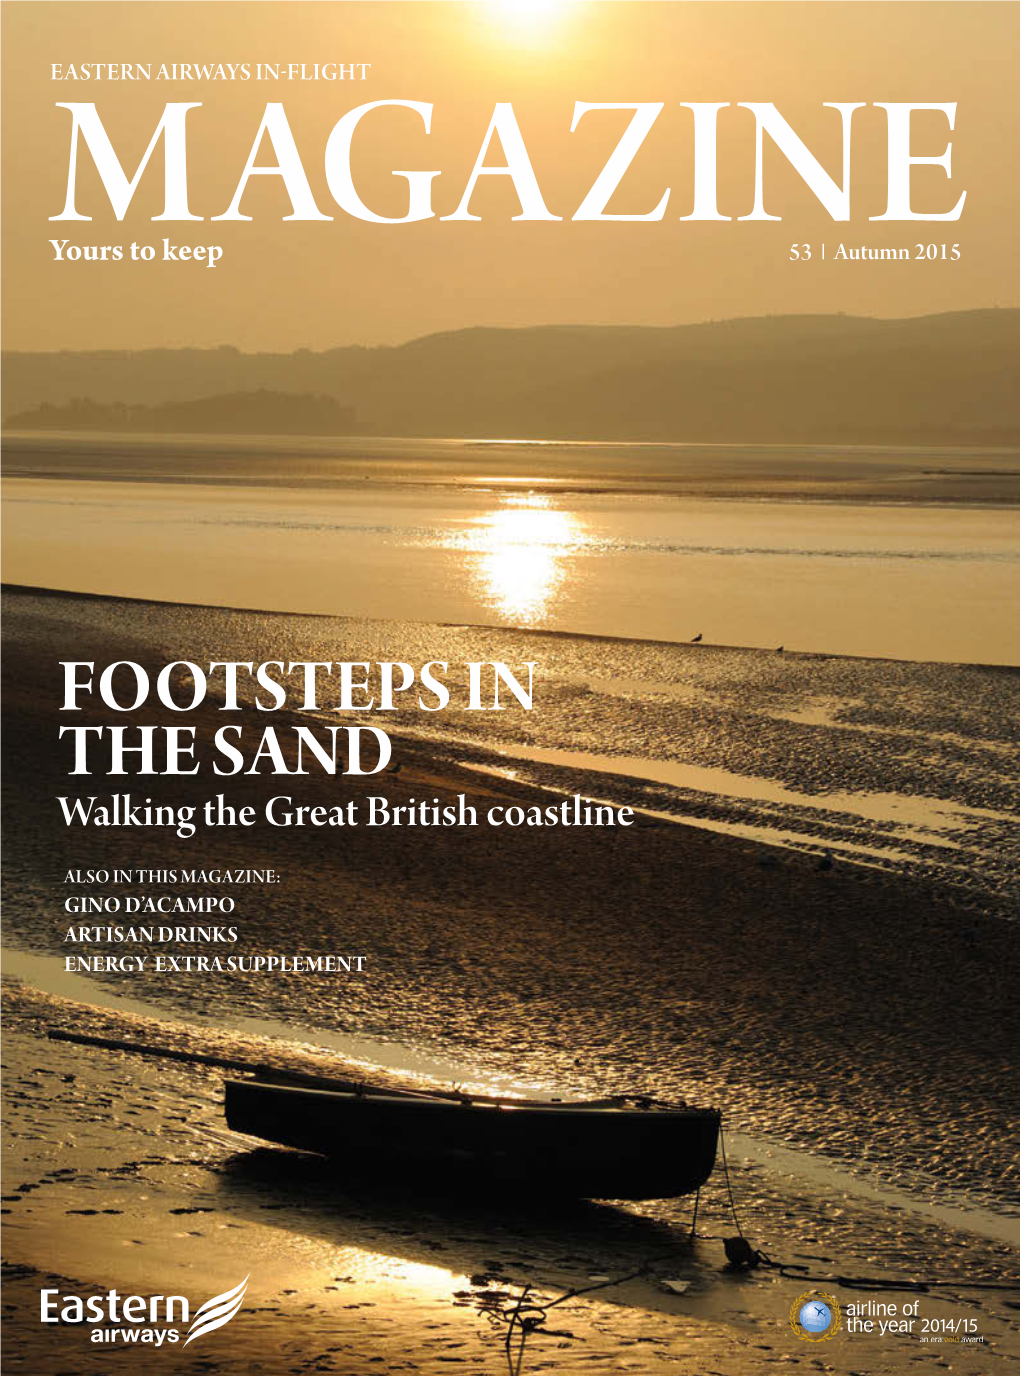 FOOTSTEPS in the SAND Walking the Great British Coastline